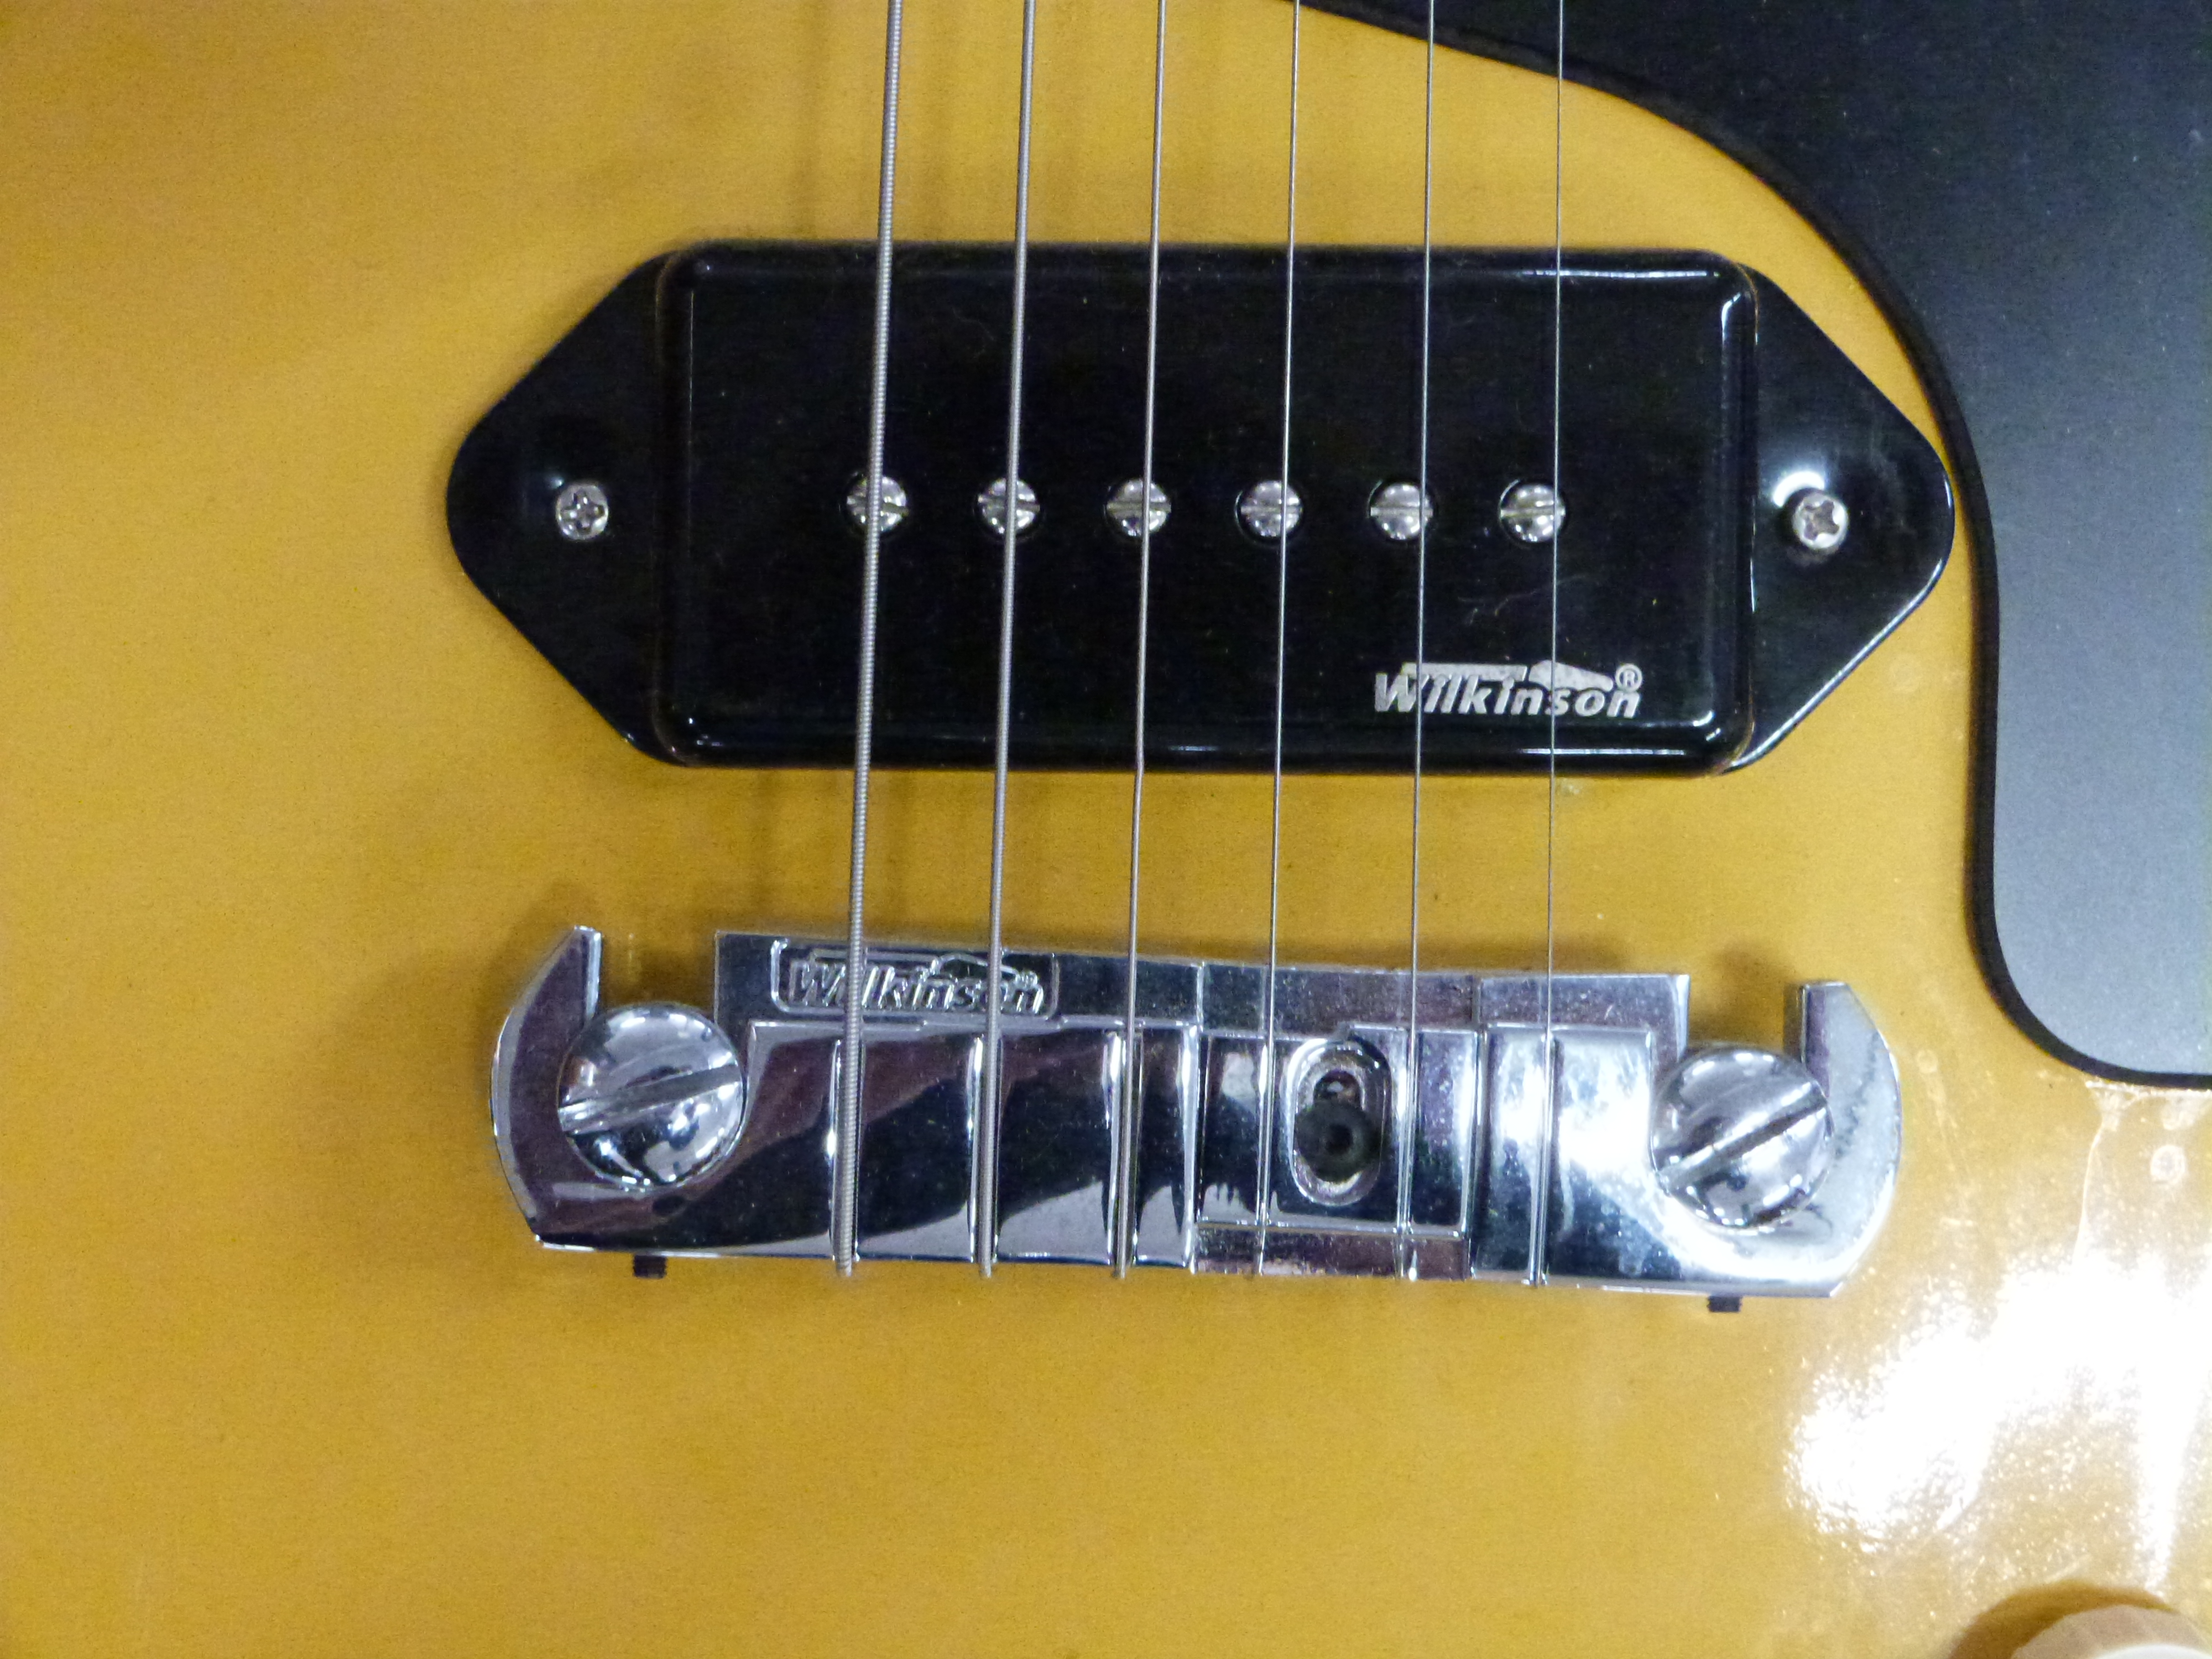 Electric guitar in yellow lacquered finish by Vintage, Wilkinson pick-up - Image 4 of 6